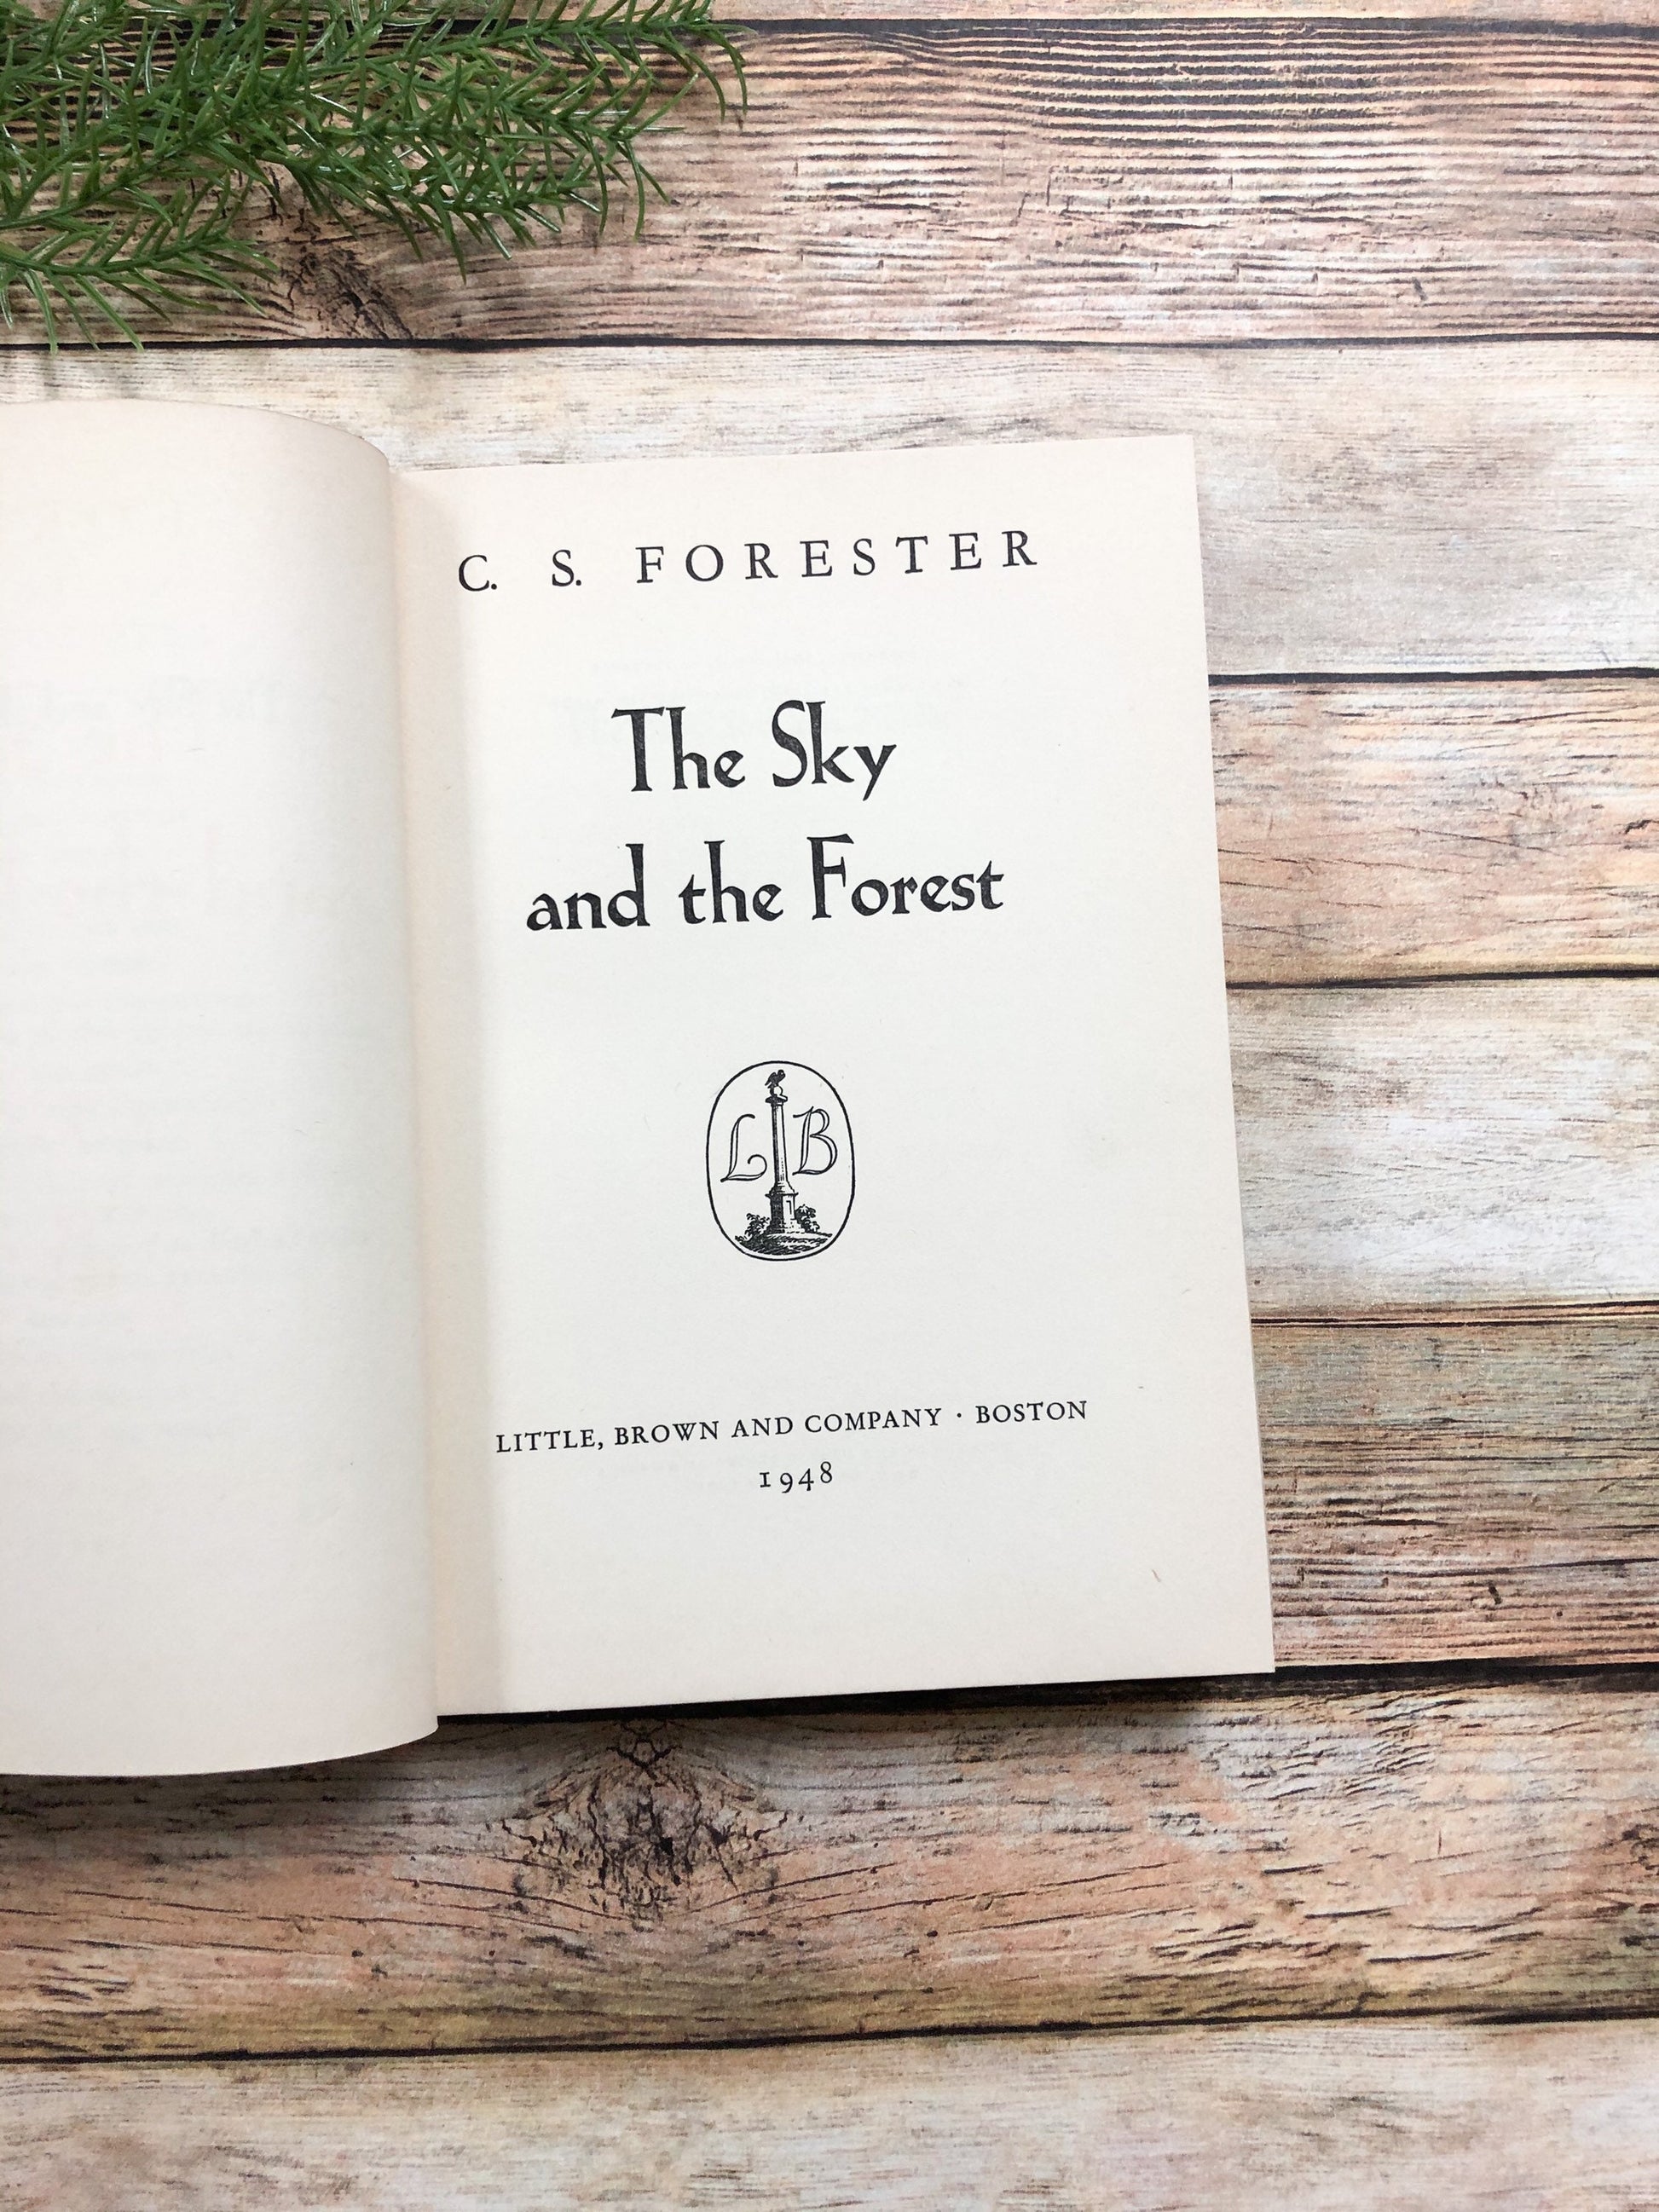 Vintage Book by C. S. Forester, The Sky and the Forest